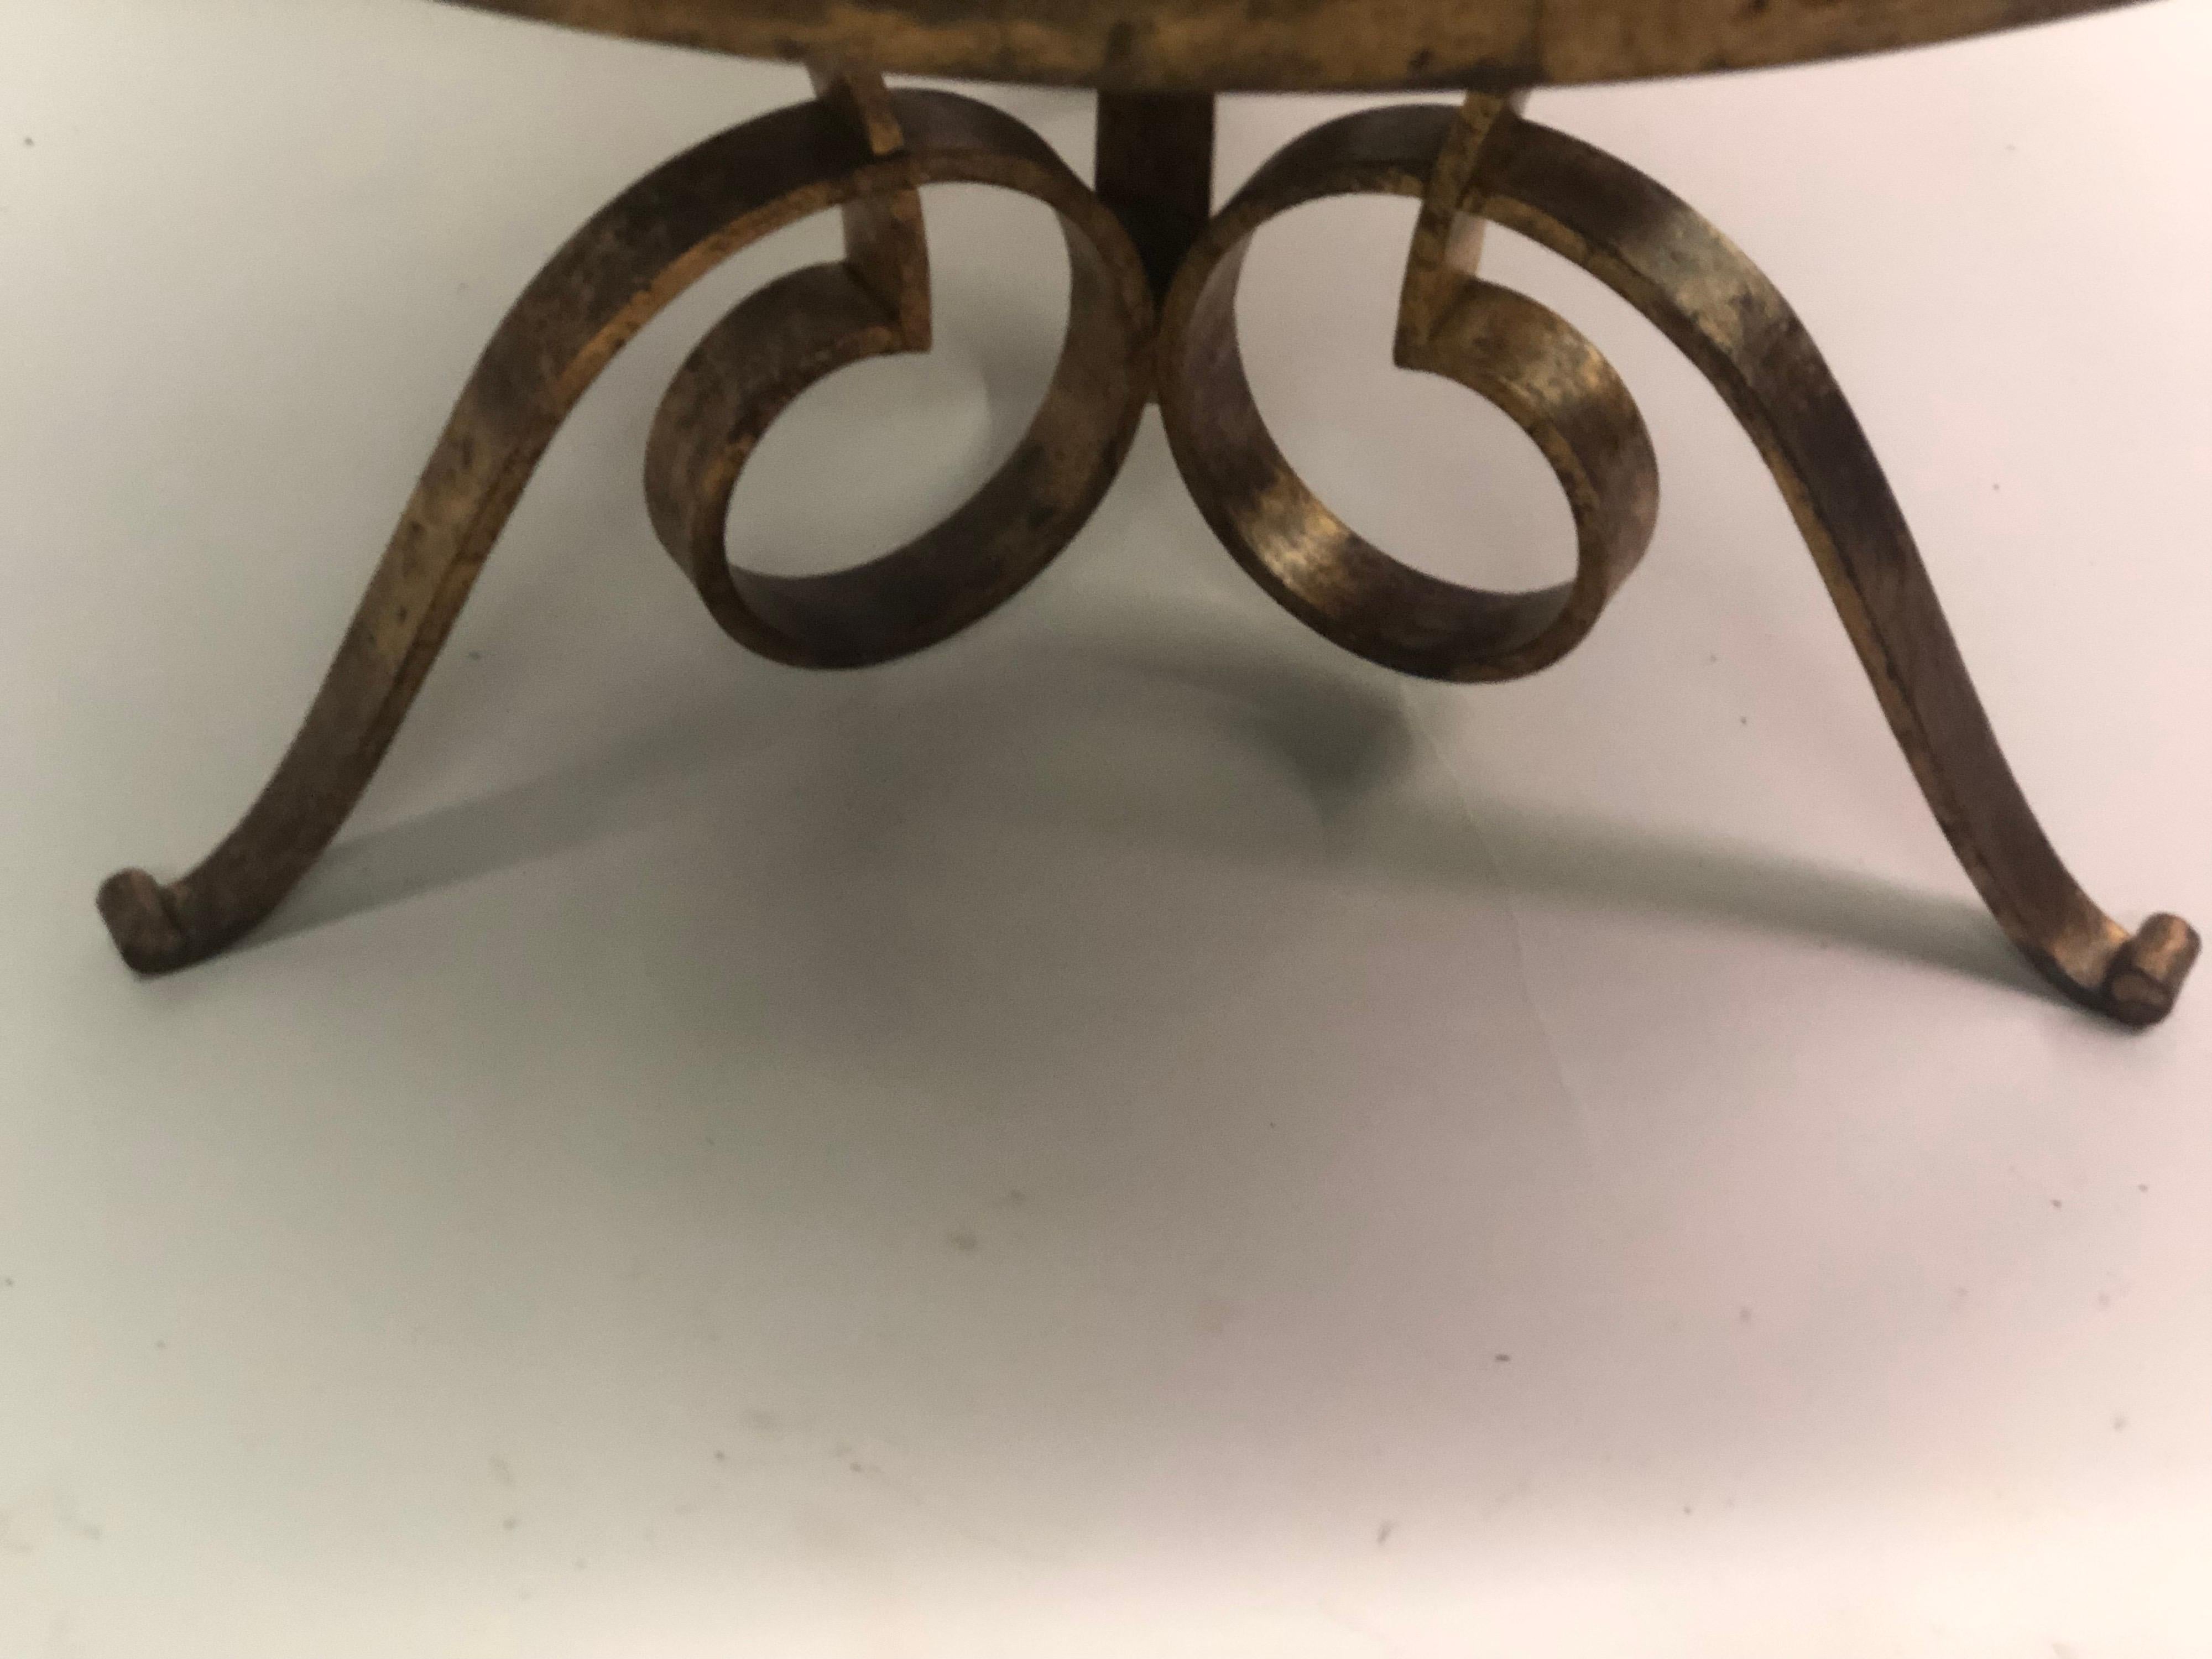 French Modern Neoclassical Gilt Wrought Iron Coffee / Side Table by Rene Drouet For Sale 2